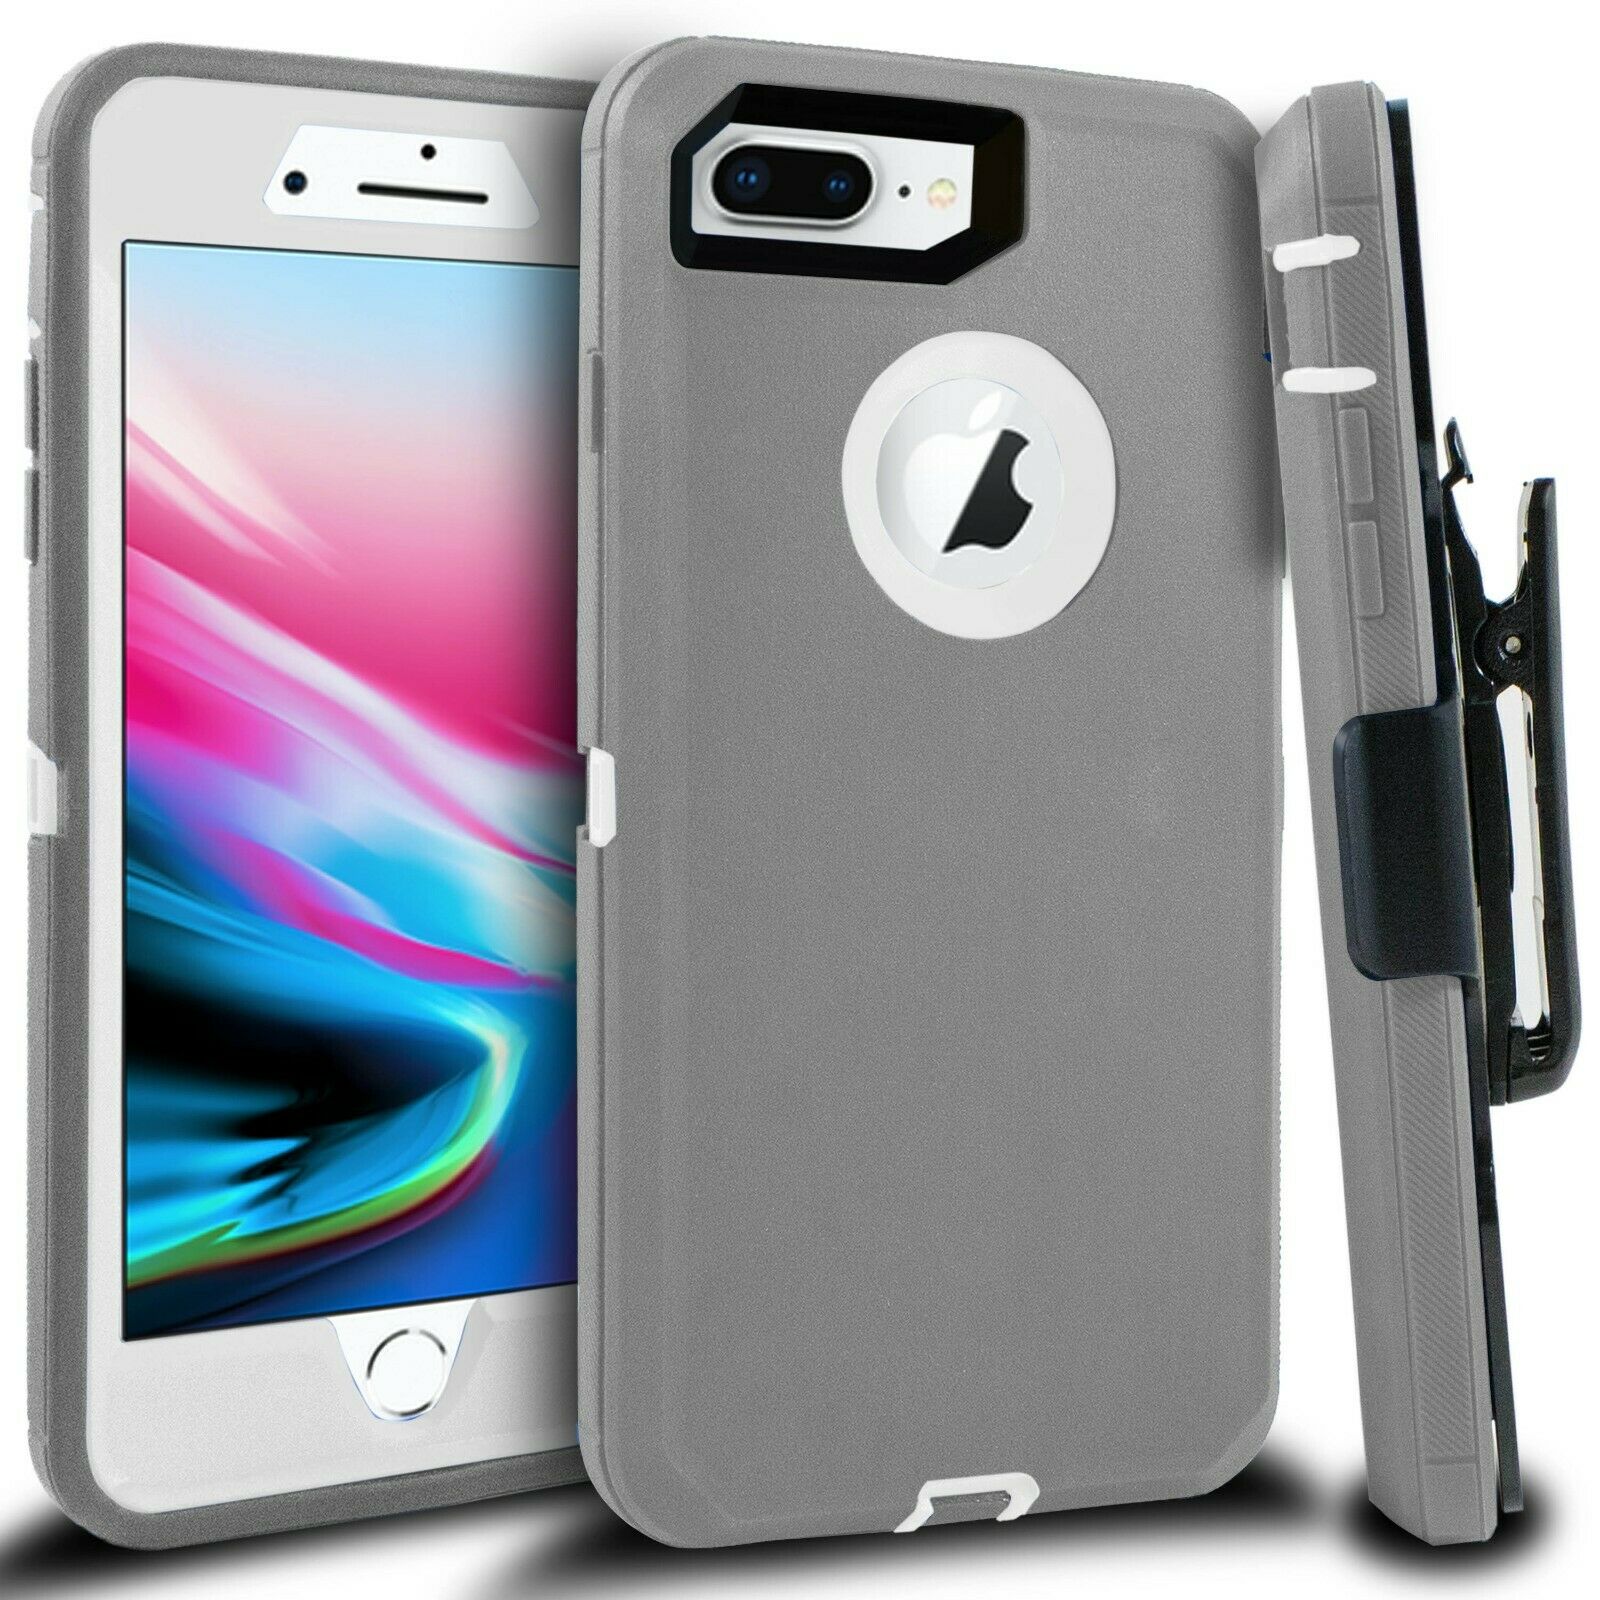 Premium Armor Heavy Duty Case with Clip for iPHONE 8 / 7 / 6S / 6 (Gray White)